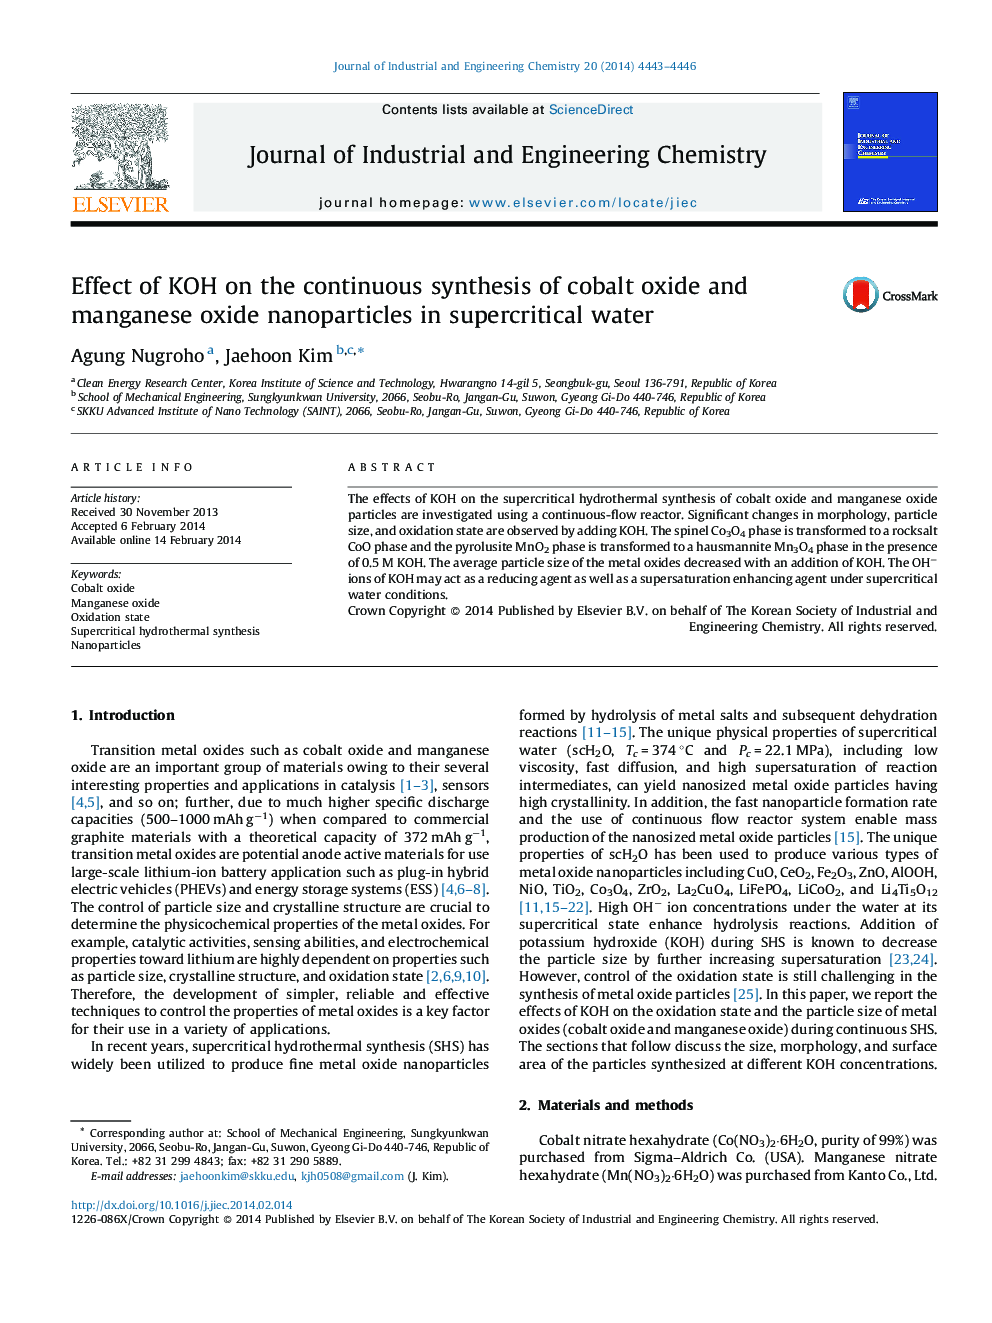 Effect of KOH on the continuous synthesis of cobalt oxide and manganese oxide nanoparticles in supercritical water